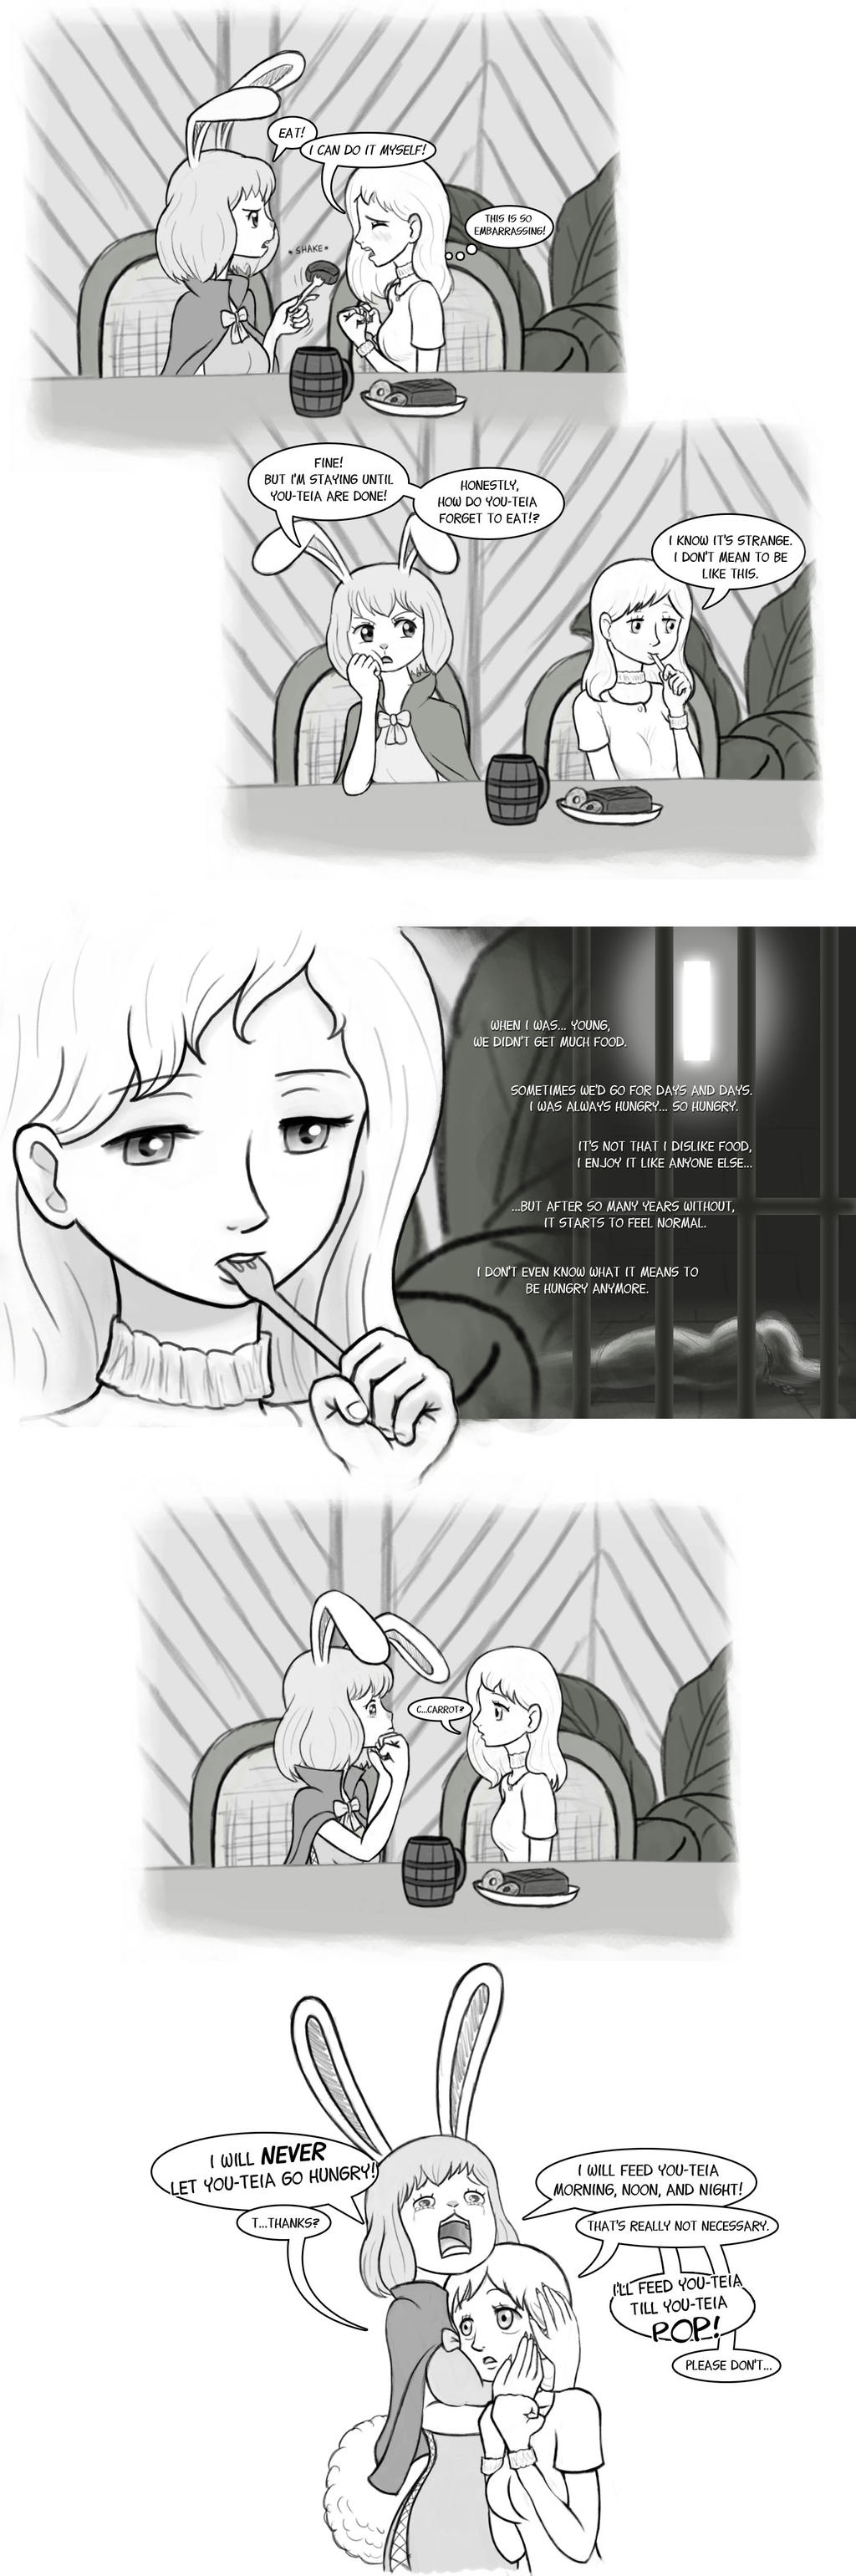 Distracting Dinner - Part 4 (final)